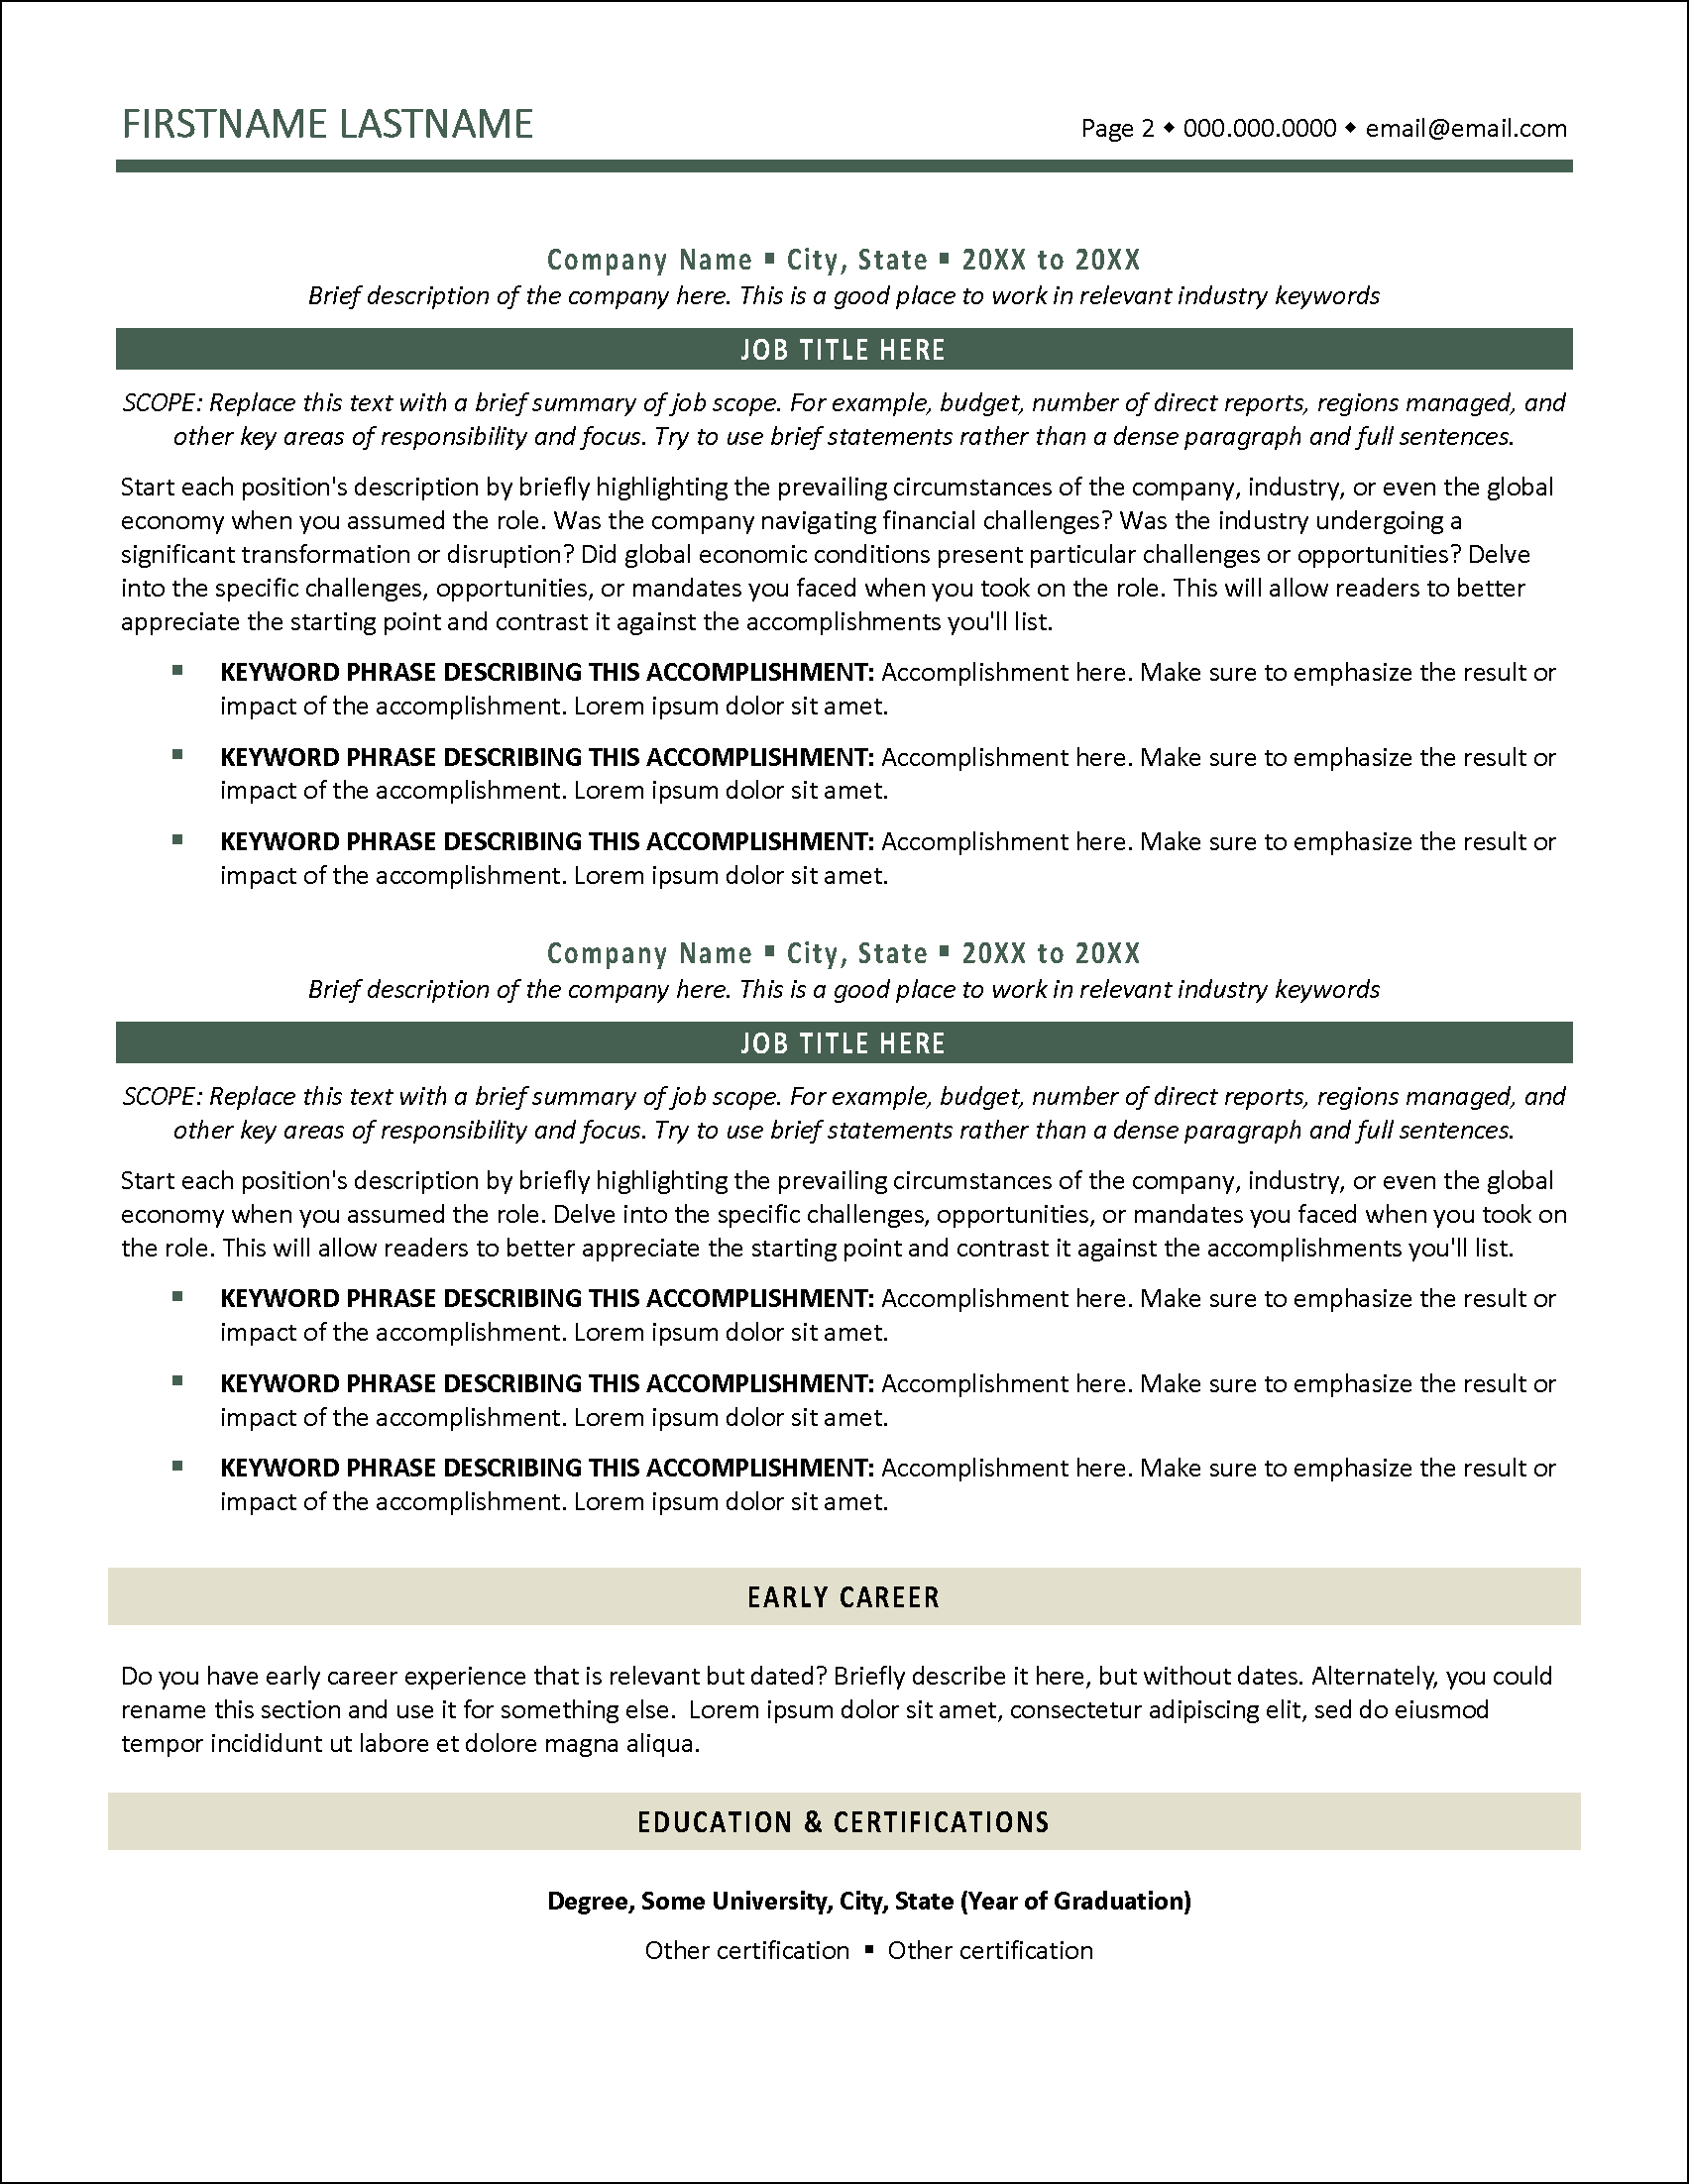 Tailored Resume Page 2